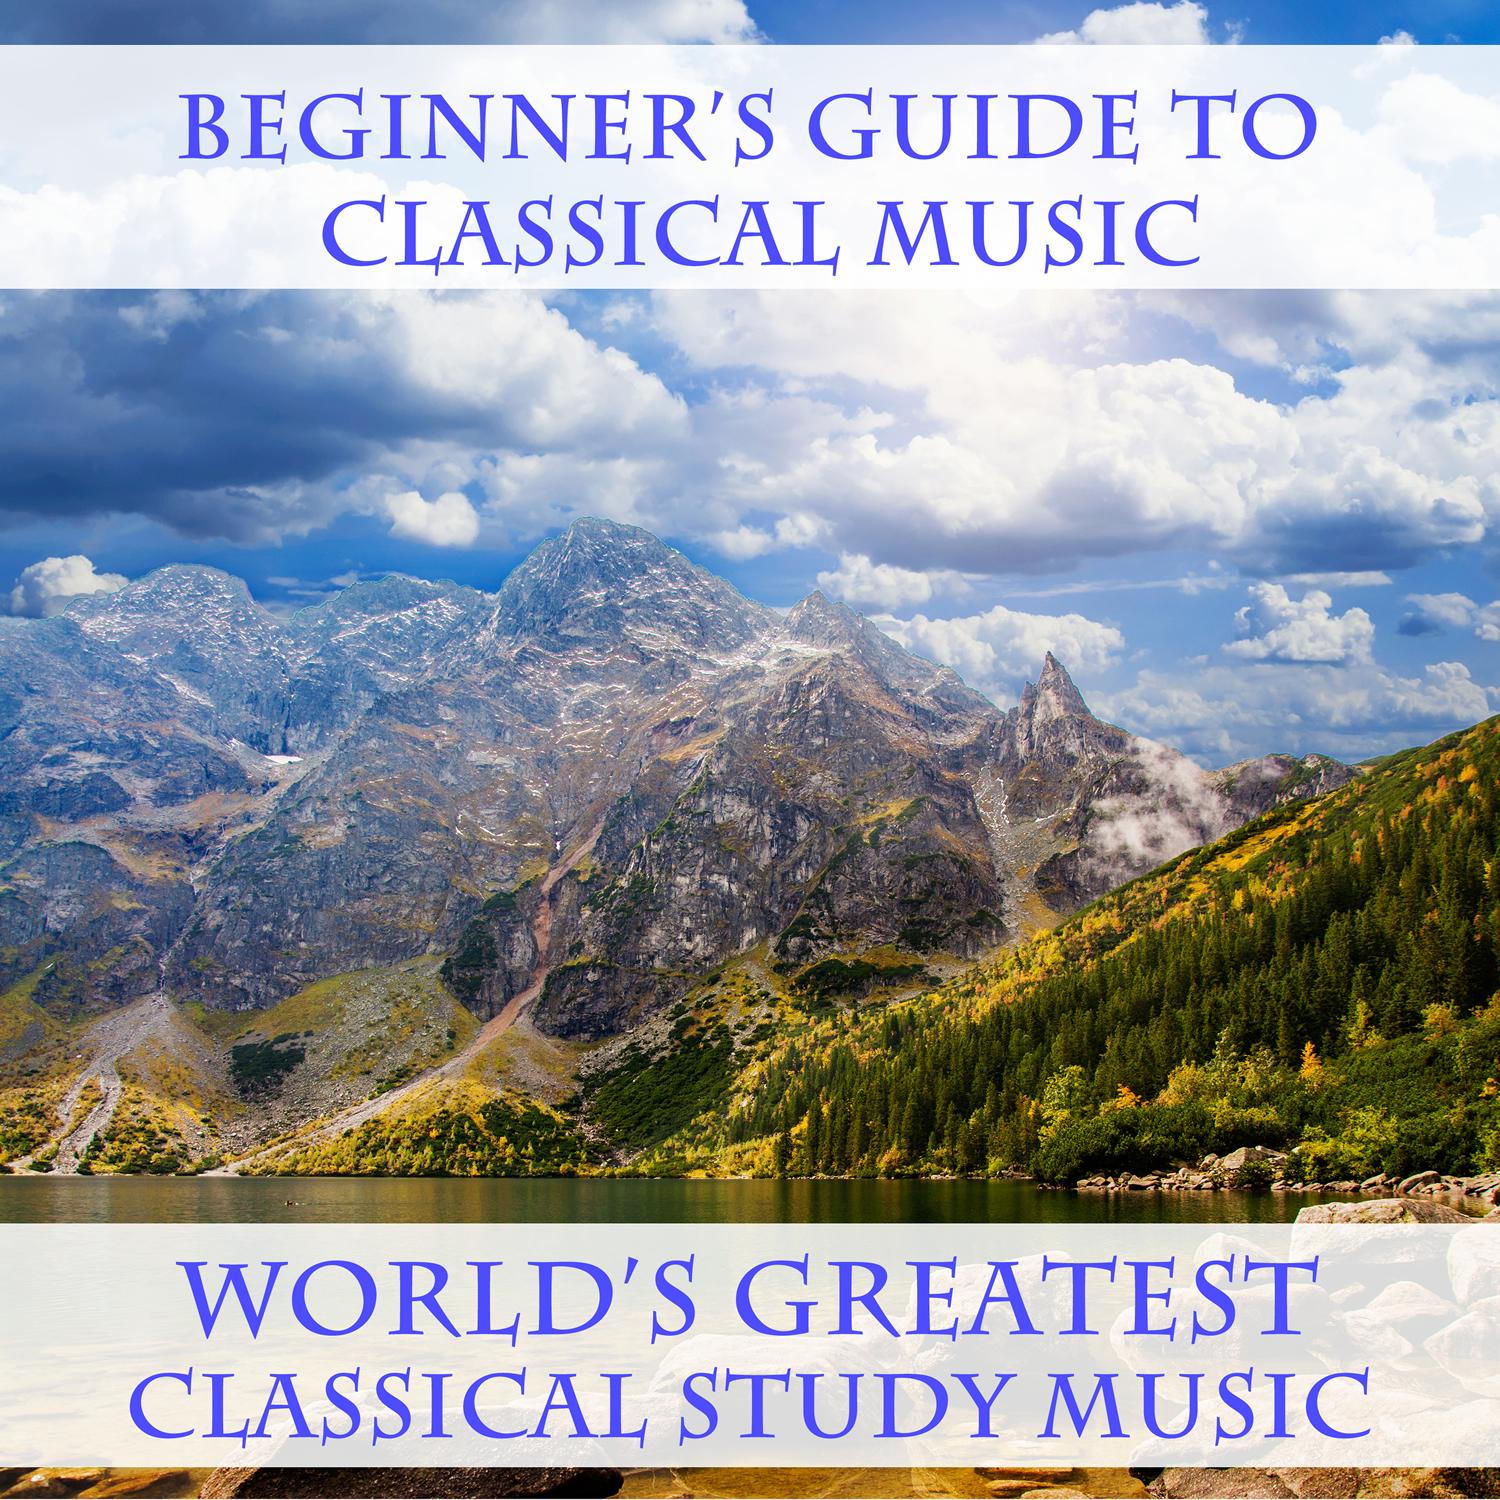 Beginner's Guide to Classical Music, World's Greatest Classical Study Music